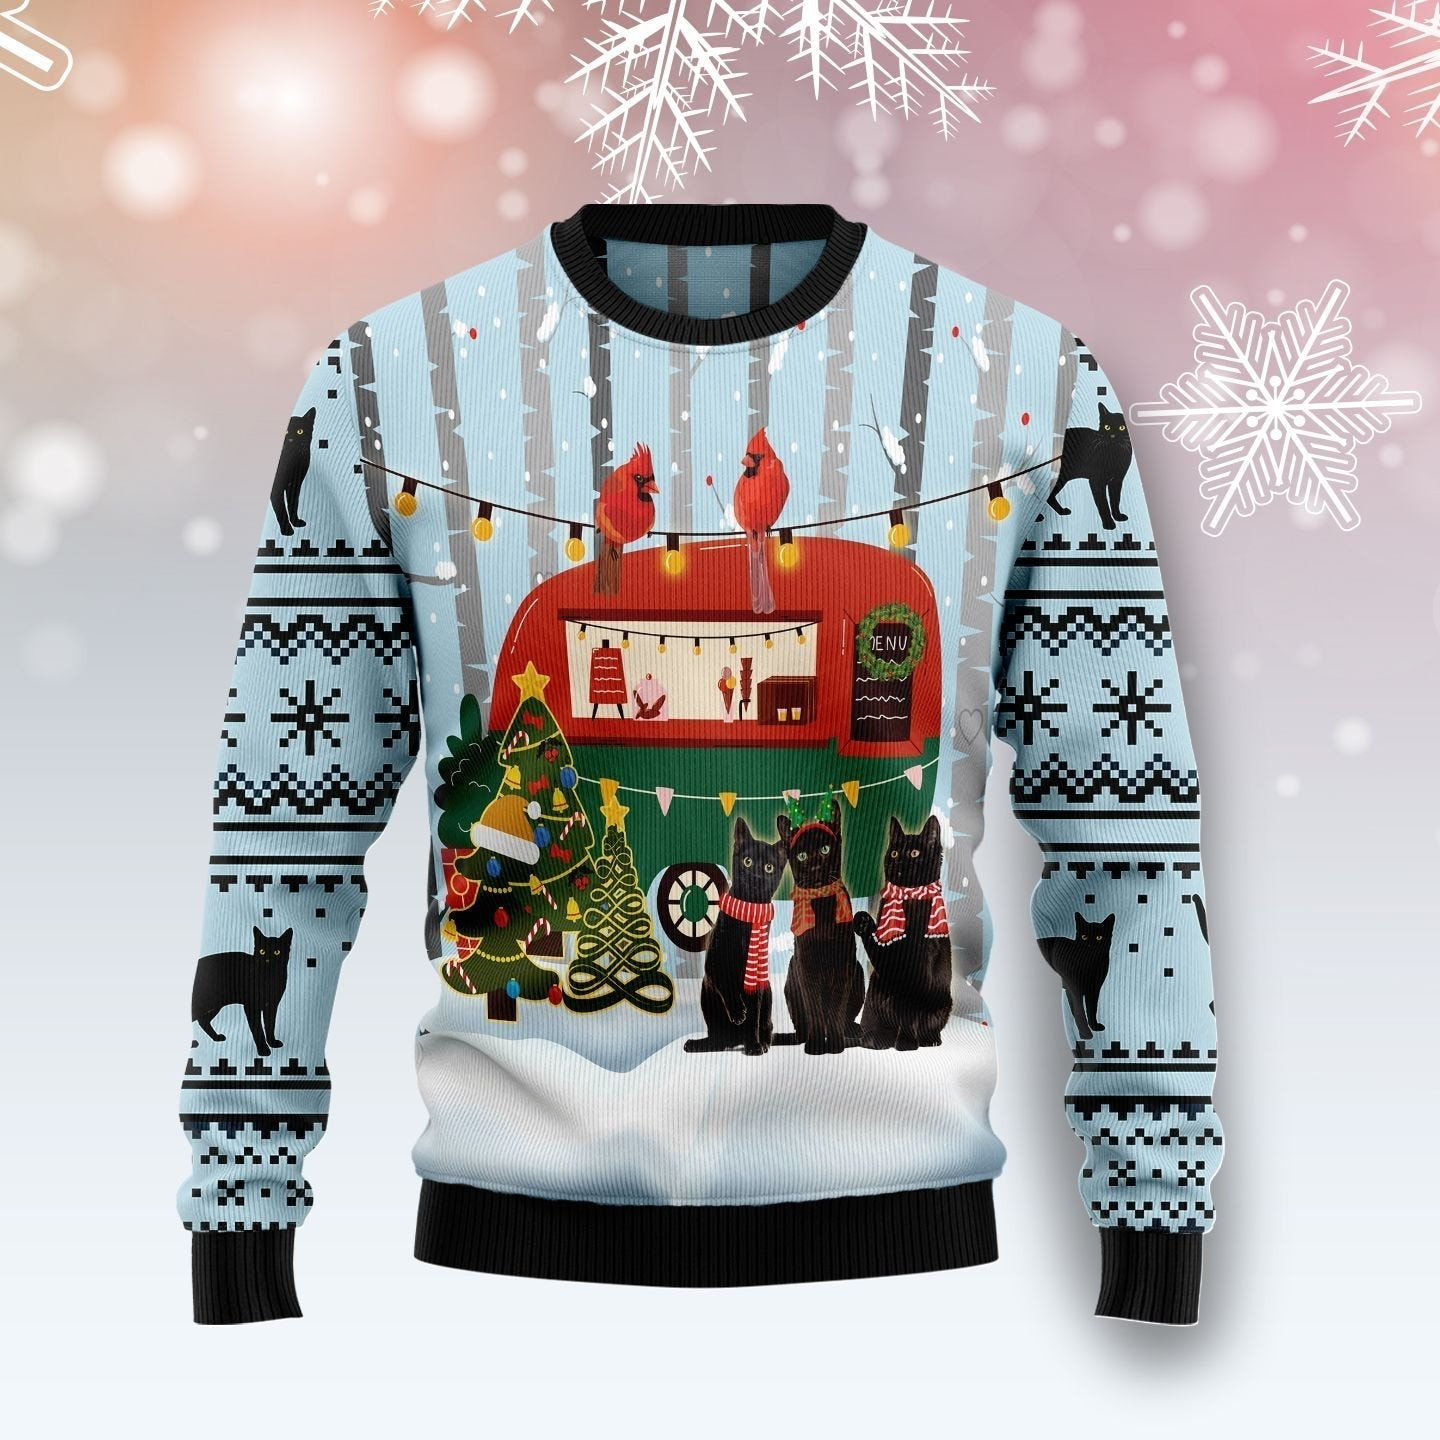 Black Cat Love Camping Ugly Christmas Sweater Ugly Sweater For Men Women